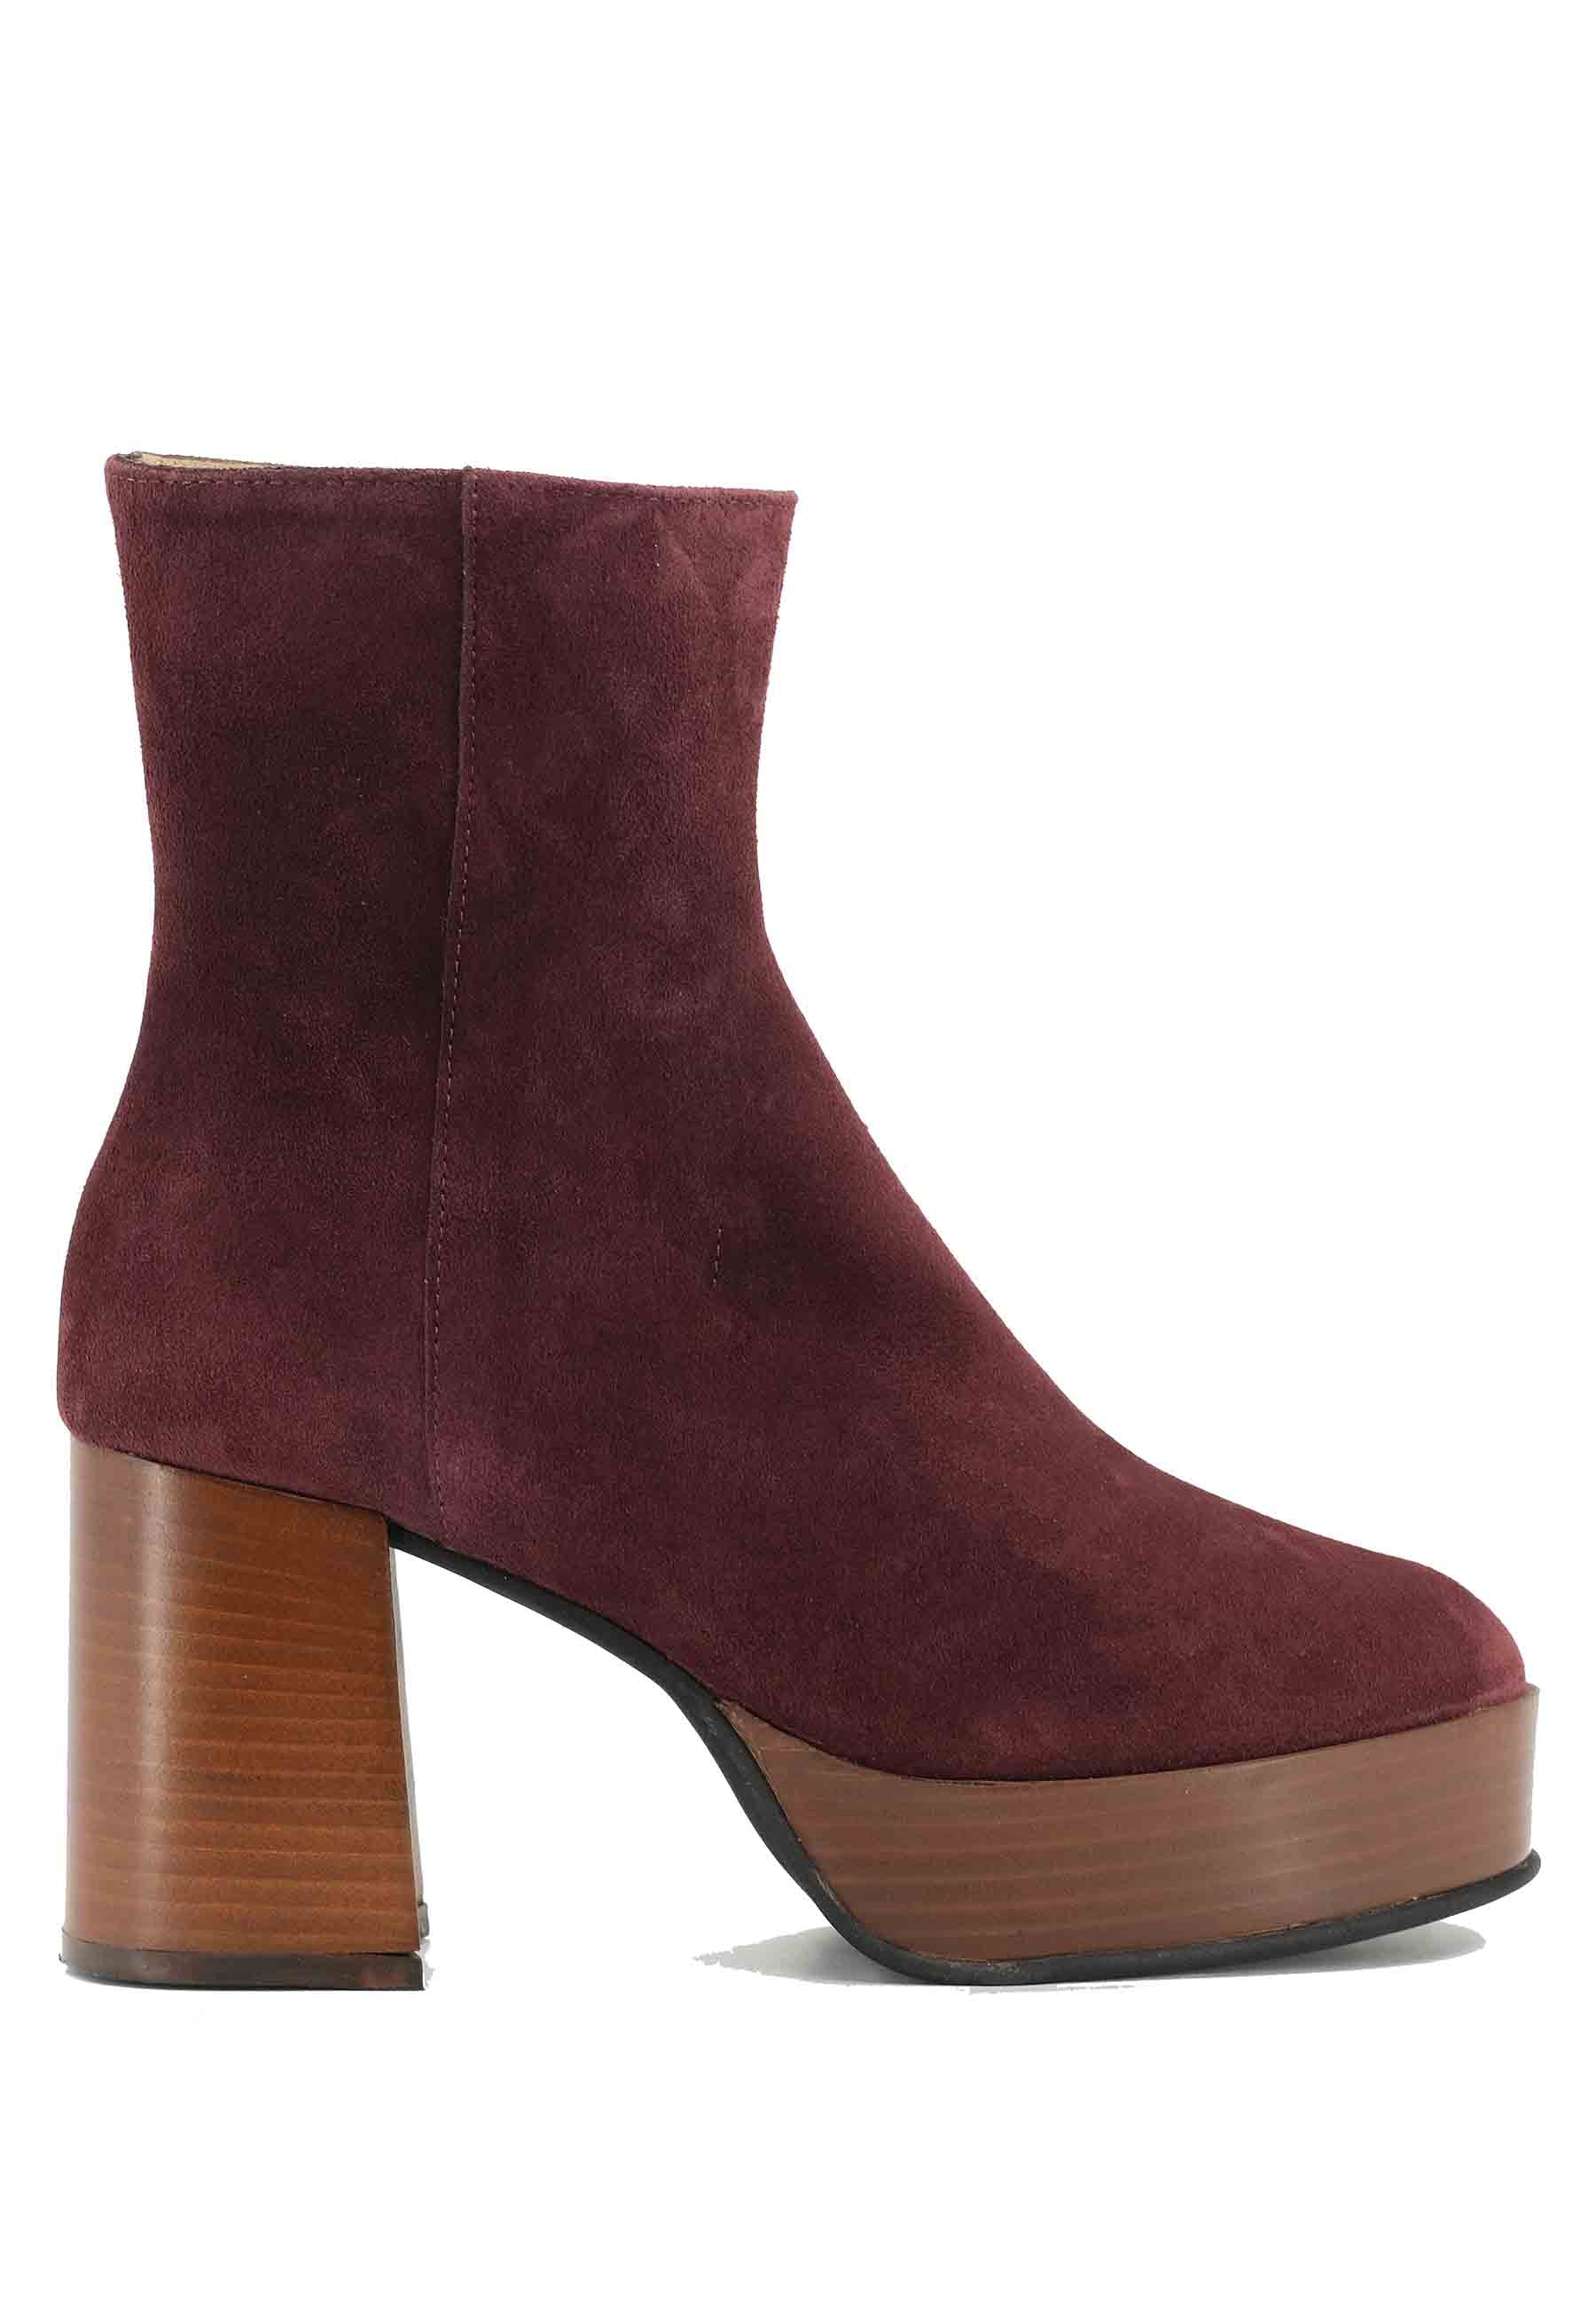 TR1556 burgundy suede ankle boots with high heel and platform with side zip closure